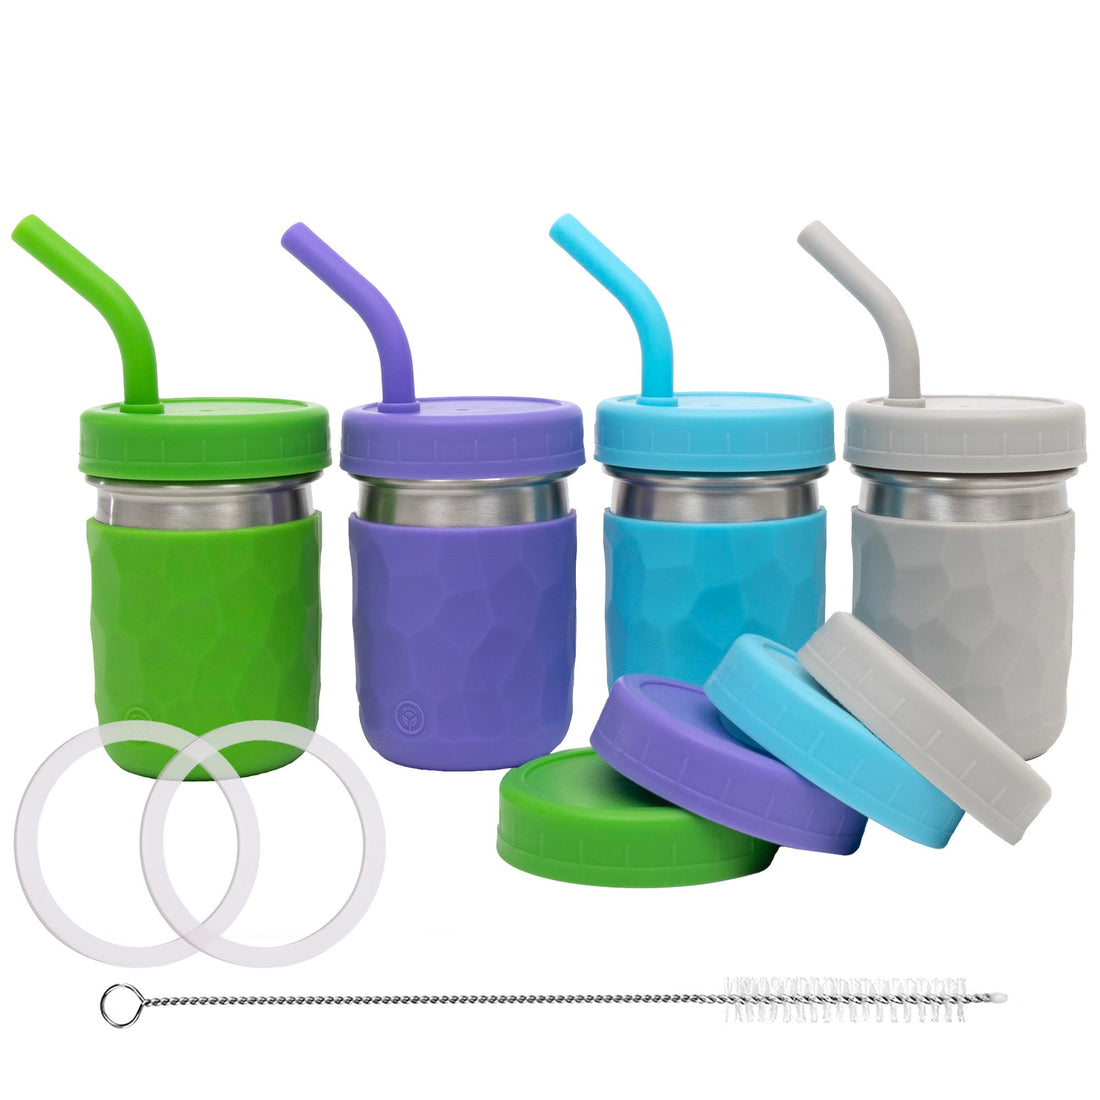 2 in 1 Silicone Snack Cup Kids Silicone Sippy Cup with Straw and 2 Handles Spill Proof Food Container for Toddler Baby